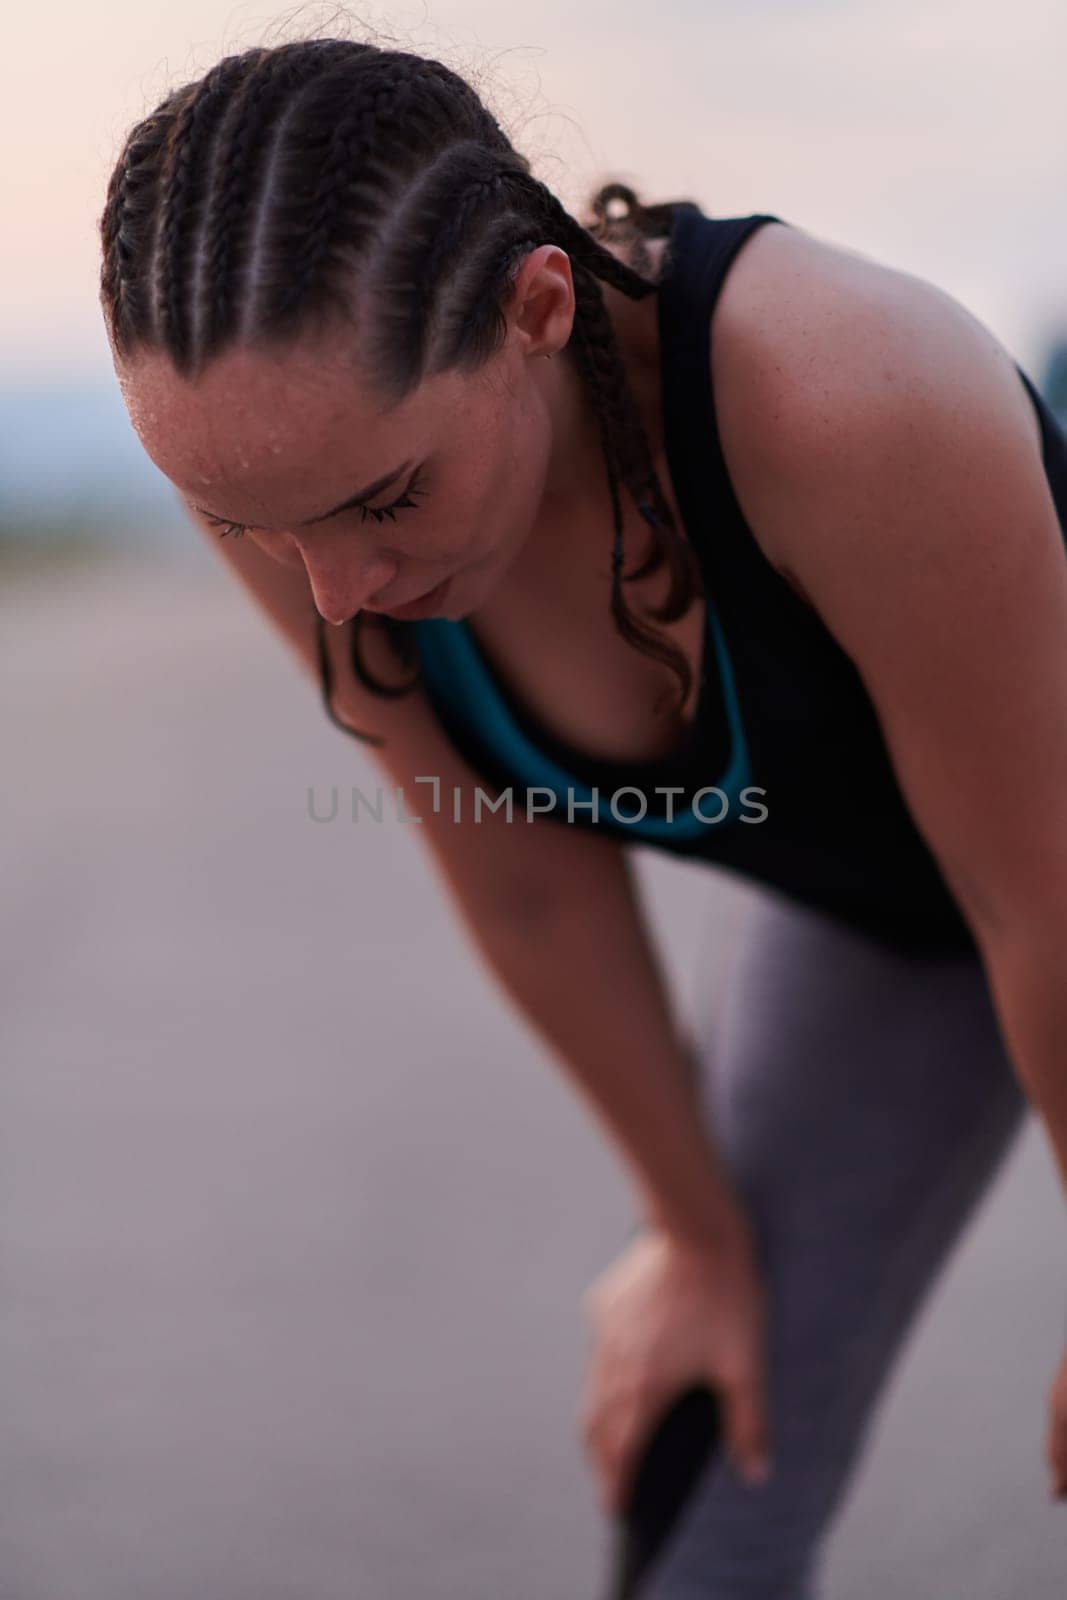 A close-up captures the raw dedication of a female athlete as she rests, sweat glistening, after a rigorous running session, embodying the true spirit of perseverance and commitment to her fitness journey